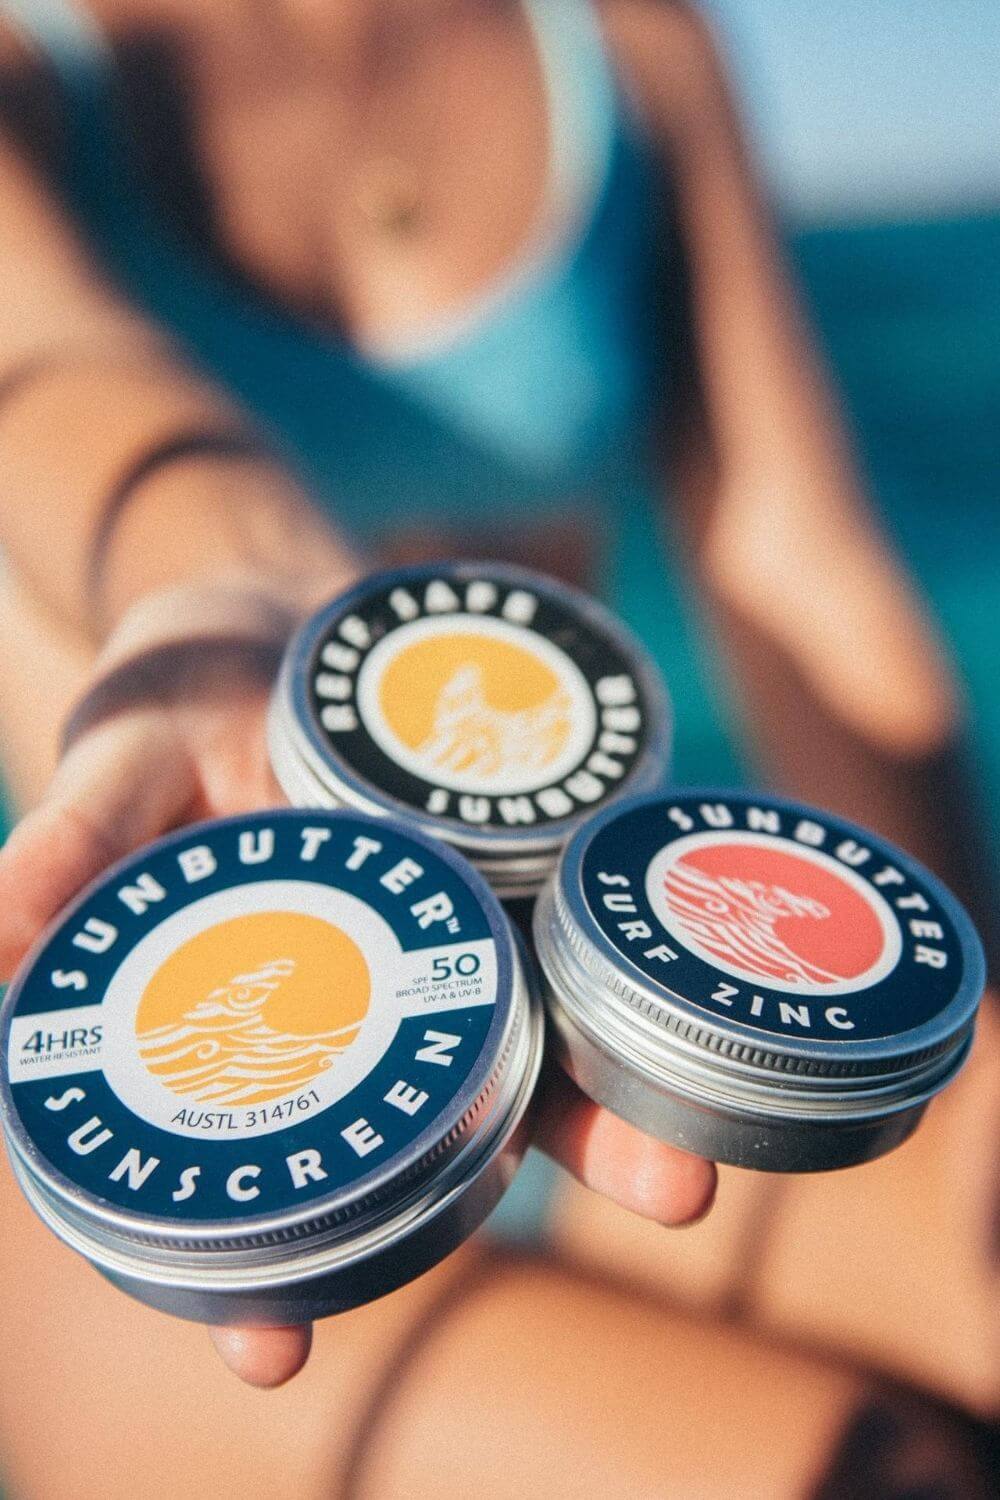 We’ve talked about reef-safe vegan sunscreen before, but this time we’re taking it a step further and looking for the best zero waste sunscreen. After all, plastic bottles aren’t good for the sea either. Image by Sunbutter #zerowastesunscreen